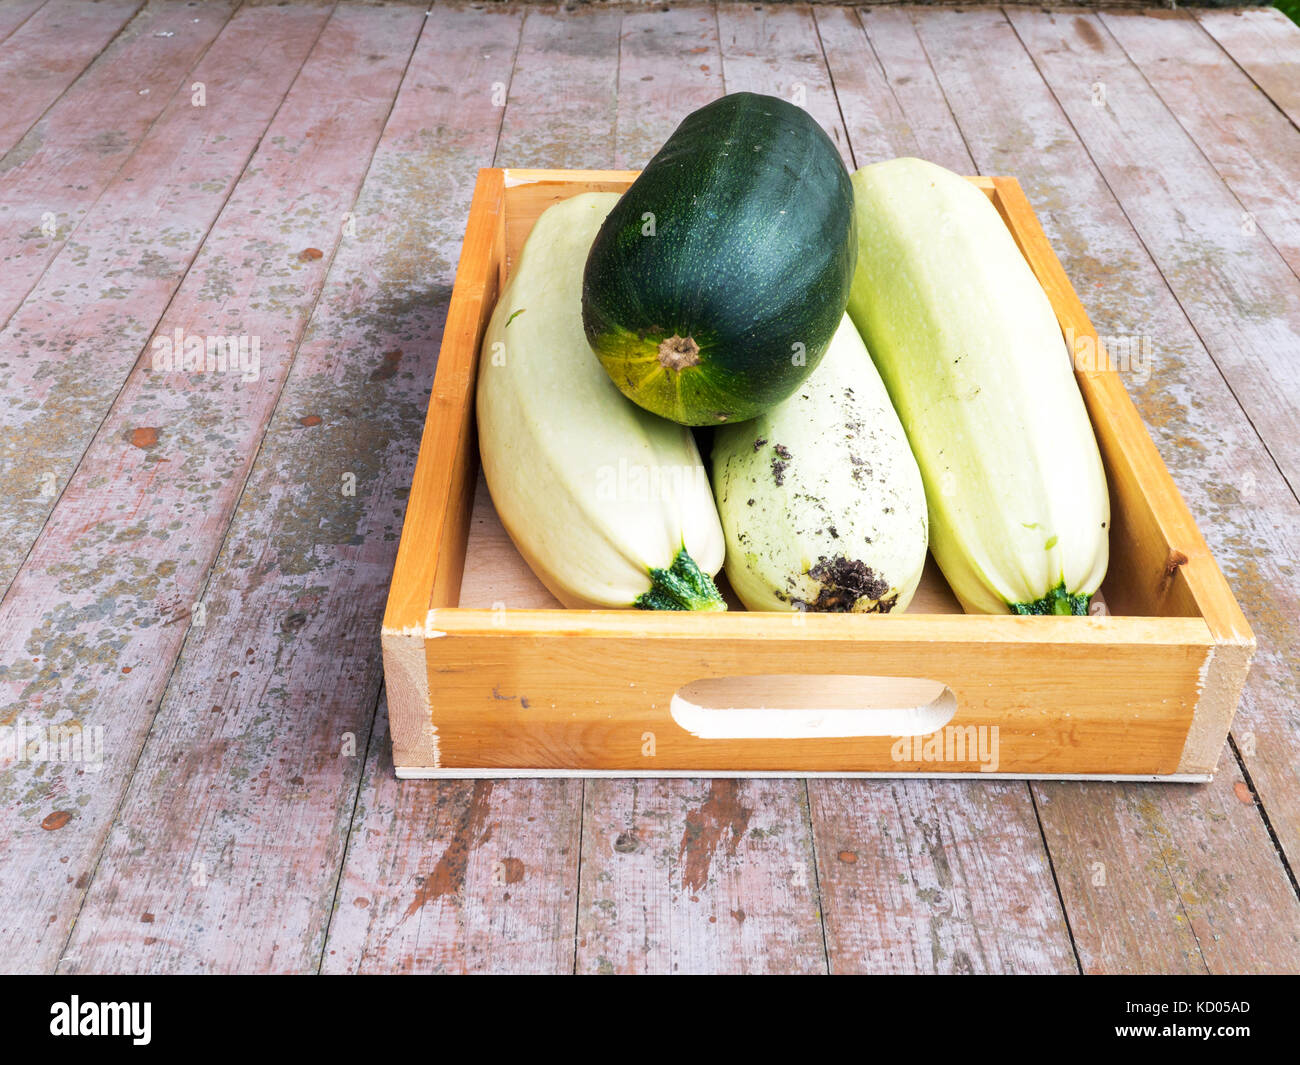 Zucchini in the wooden box on the planks floor. Green and white marrow squash crop. Stock Photo